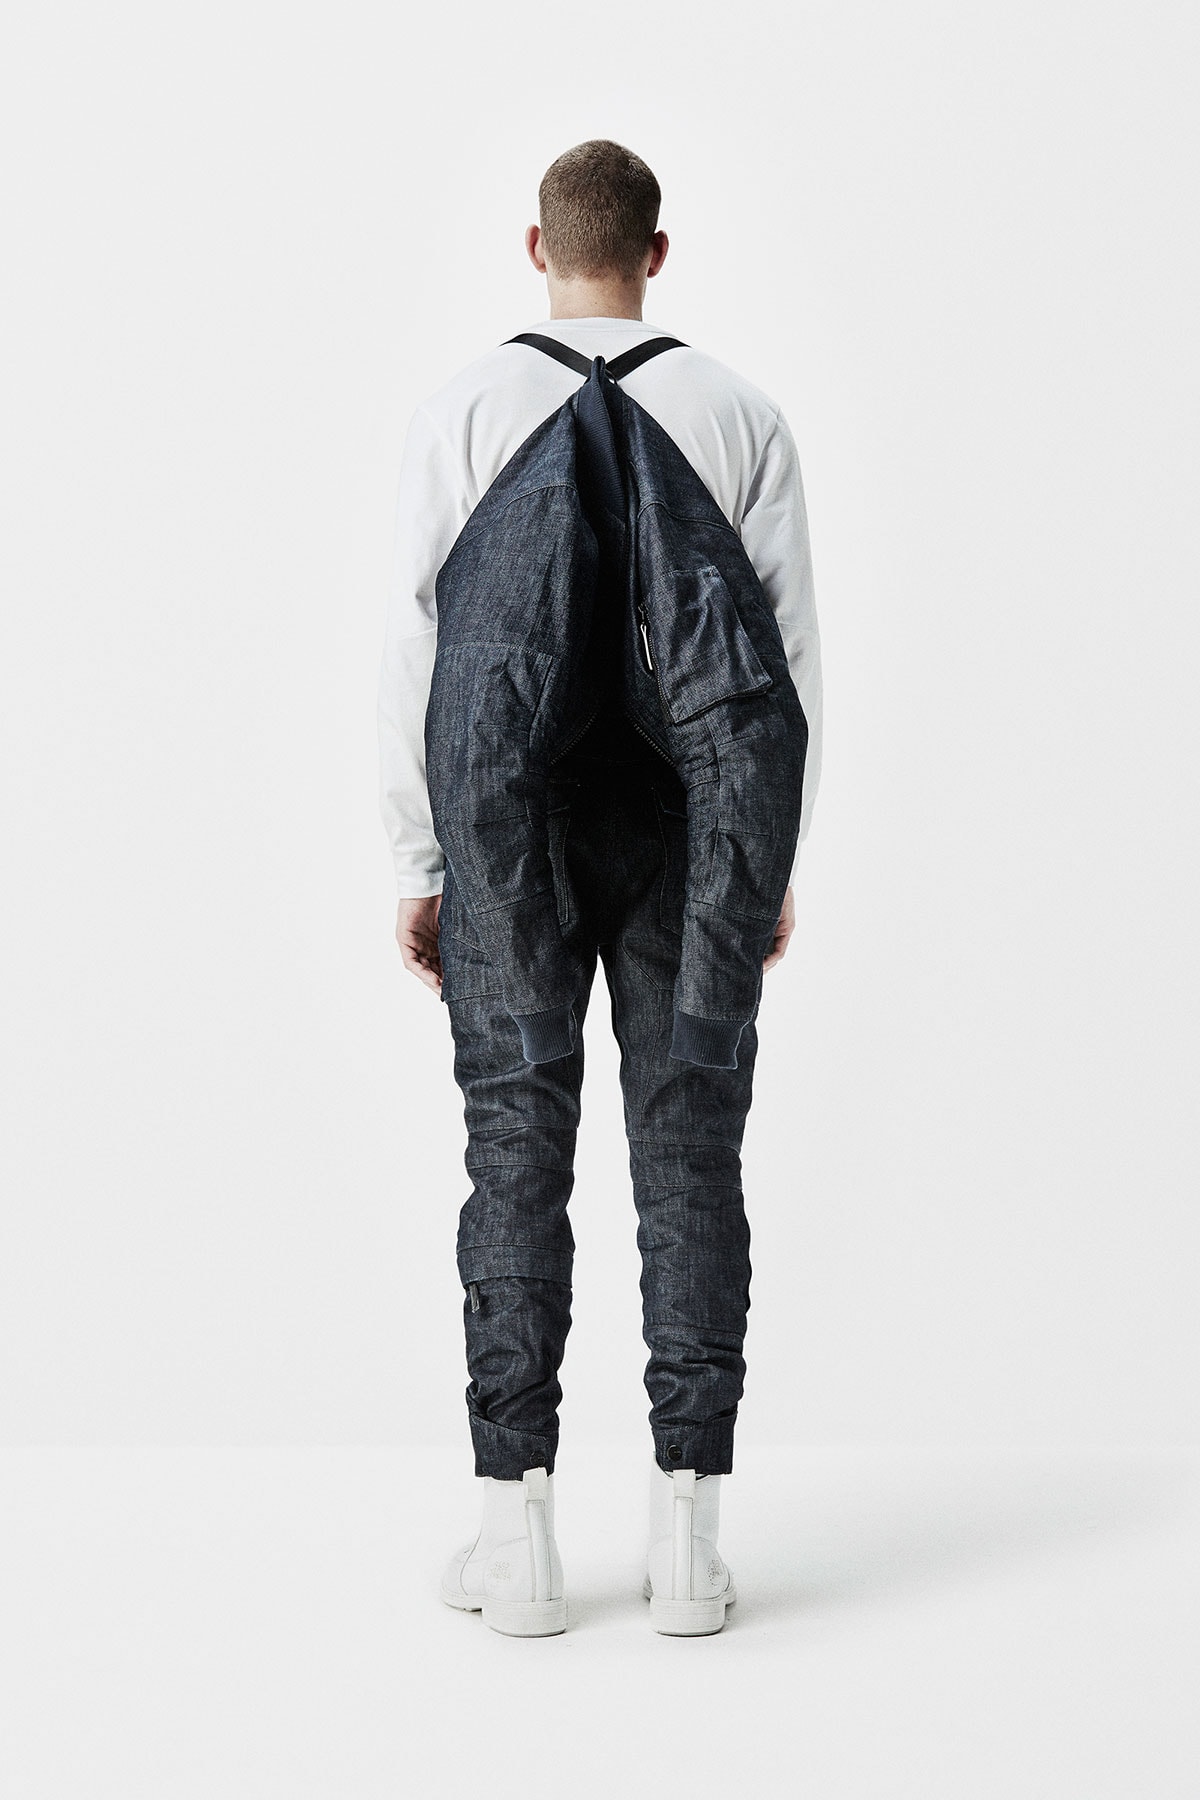 G-Star RAW Research 2016 FW Collection